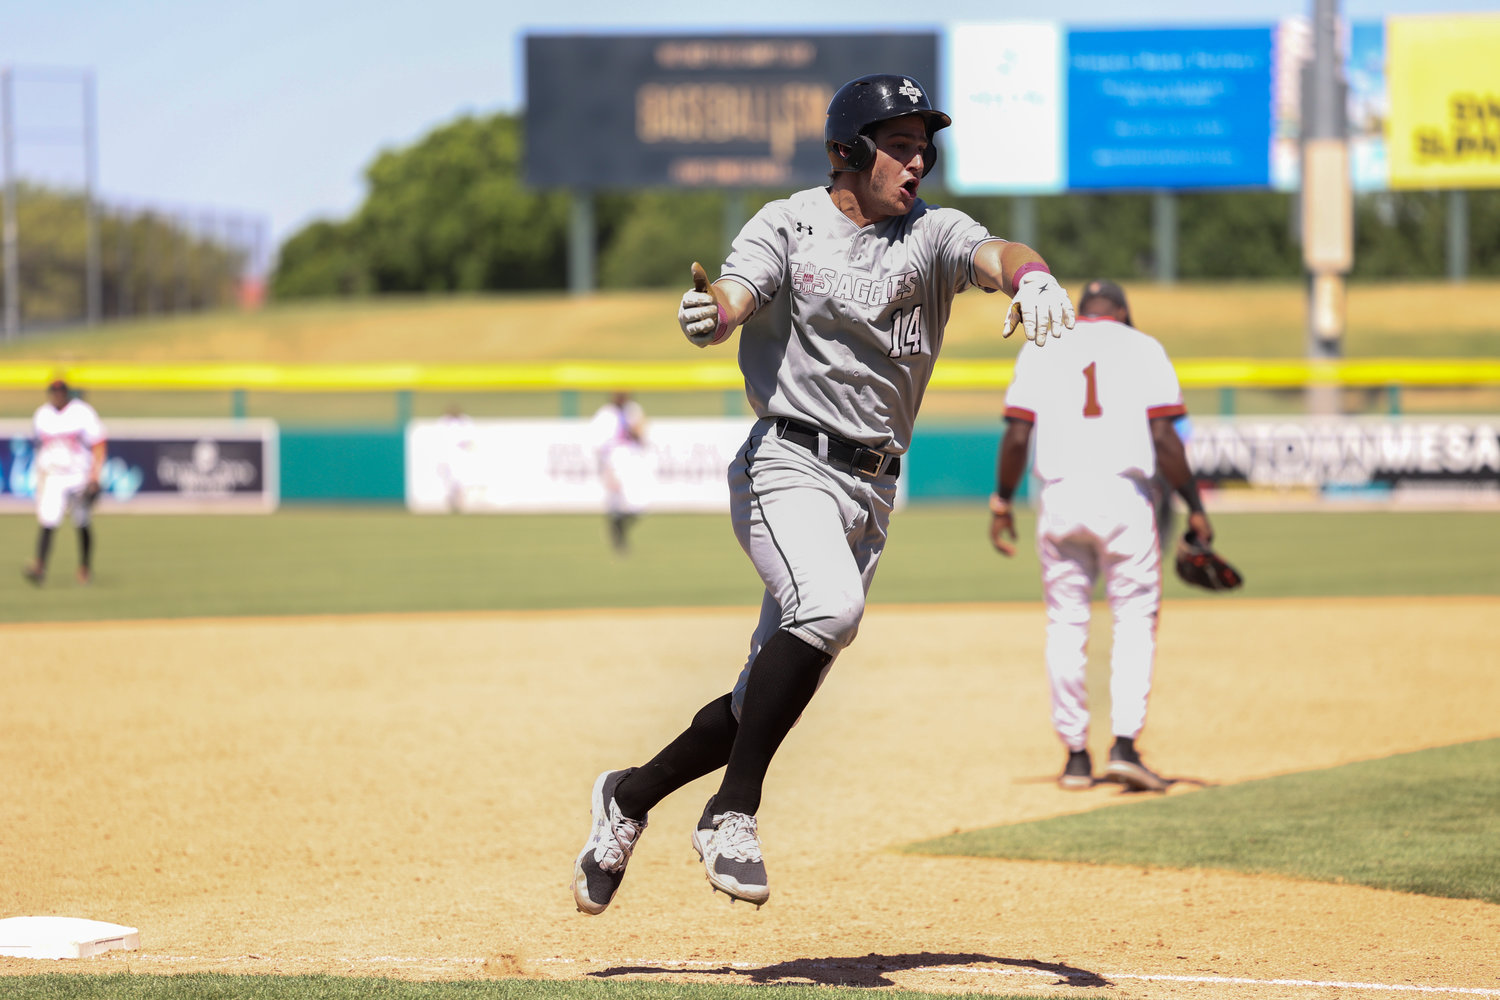 NM State's Tommy Tabak hit a key homer in the Aggies' win over Sam Houston State in the first round of the WAC tourney May 25 in Mesa, Arizona.